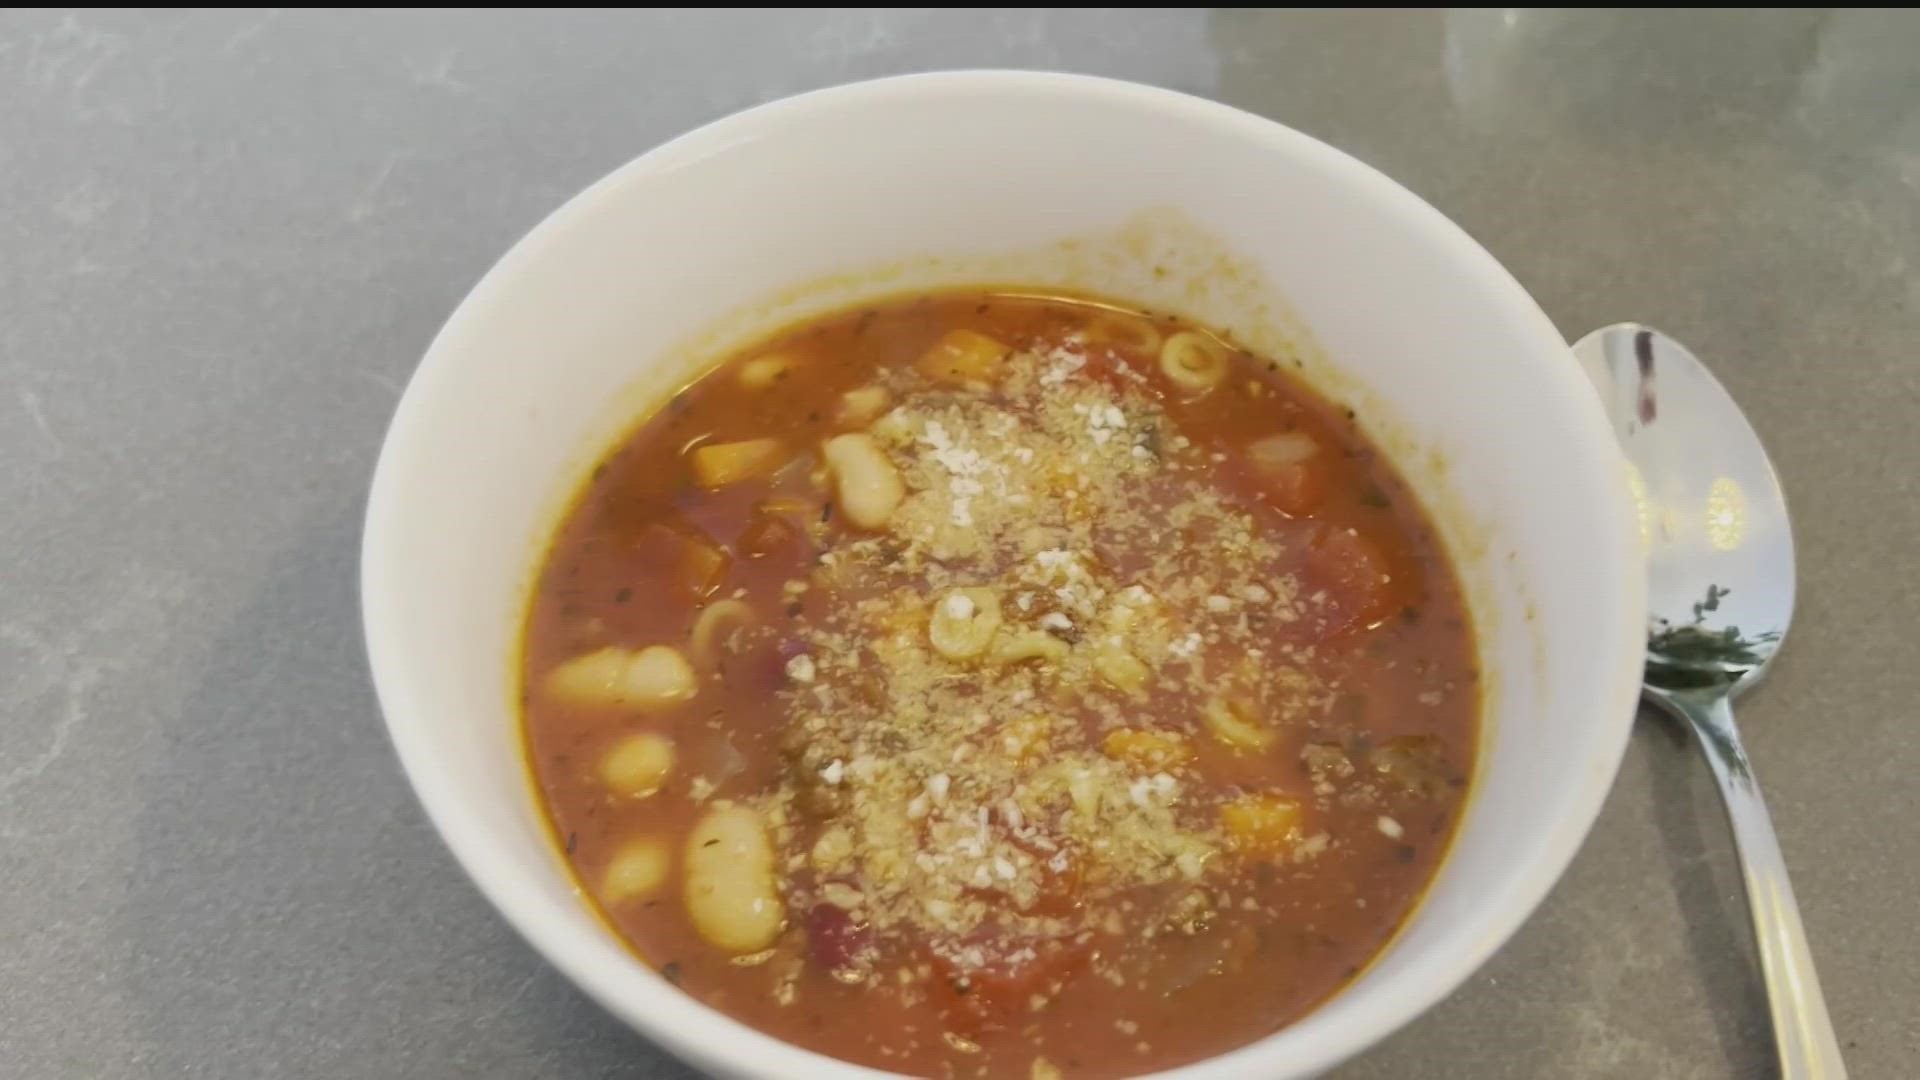 With a big weekend cooldown ahead, Rena's awesome Pasta E Fagioli soup could be your secret warmup weapon. It's hearty and oh-so-good.